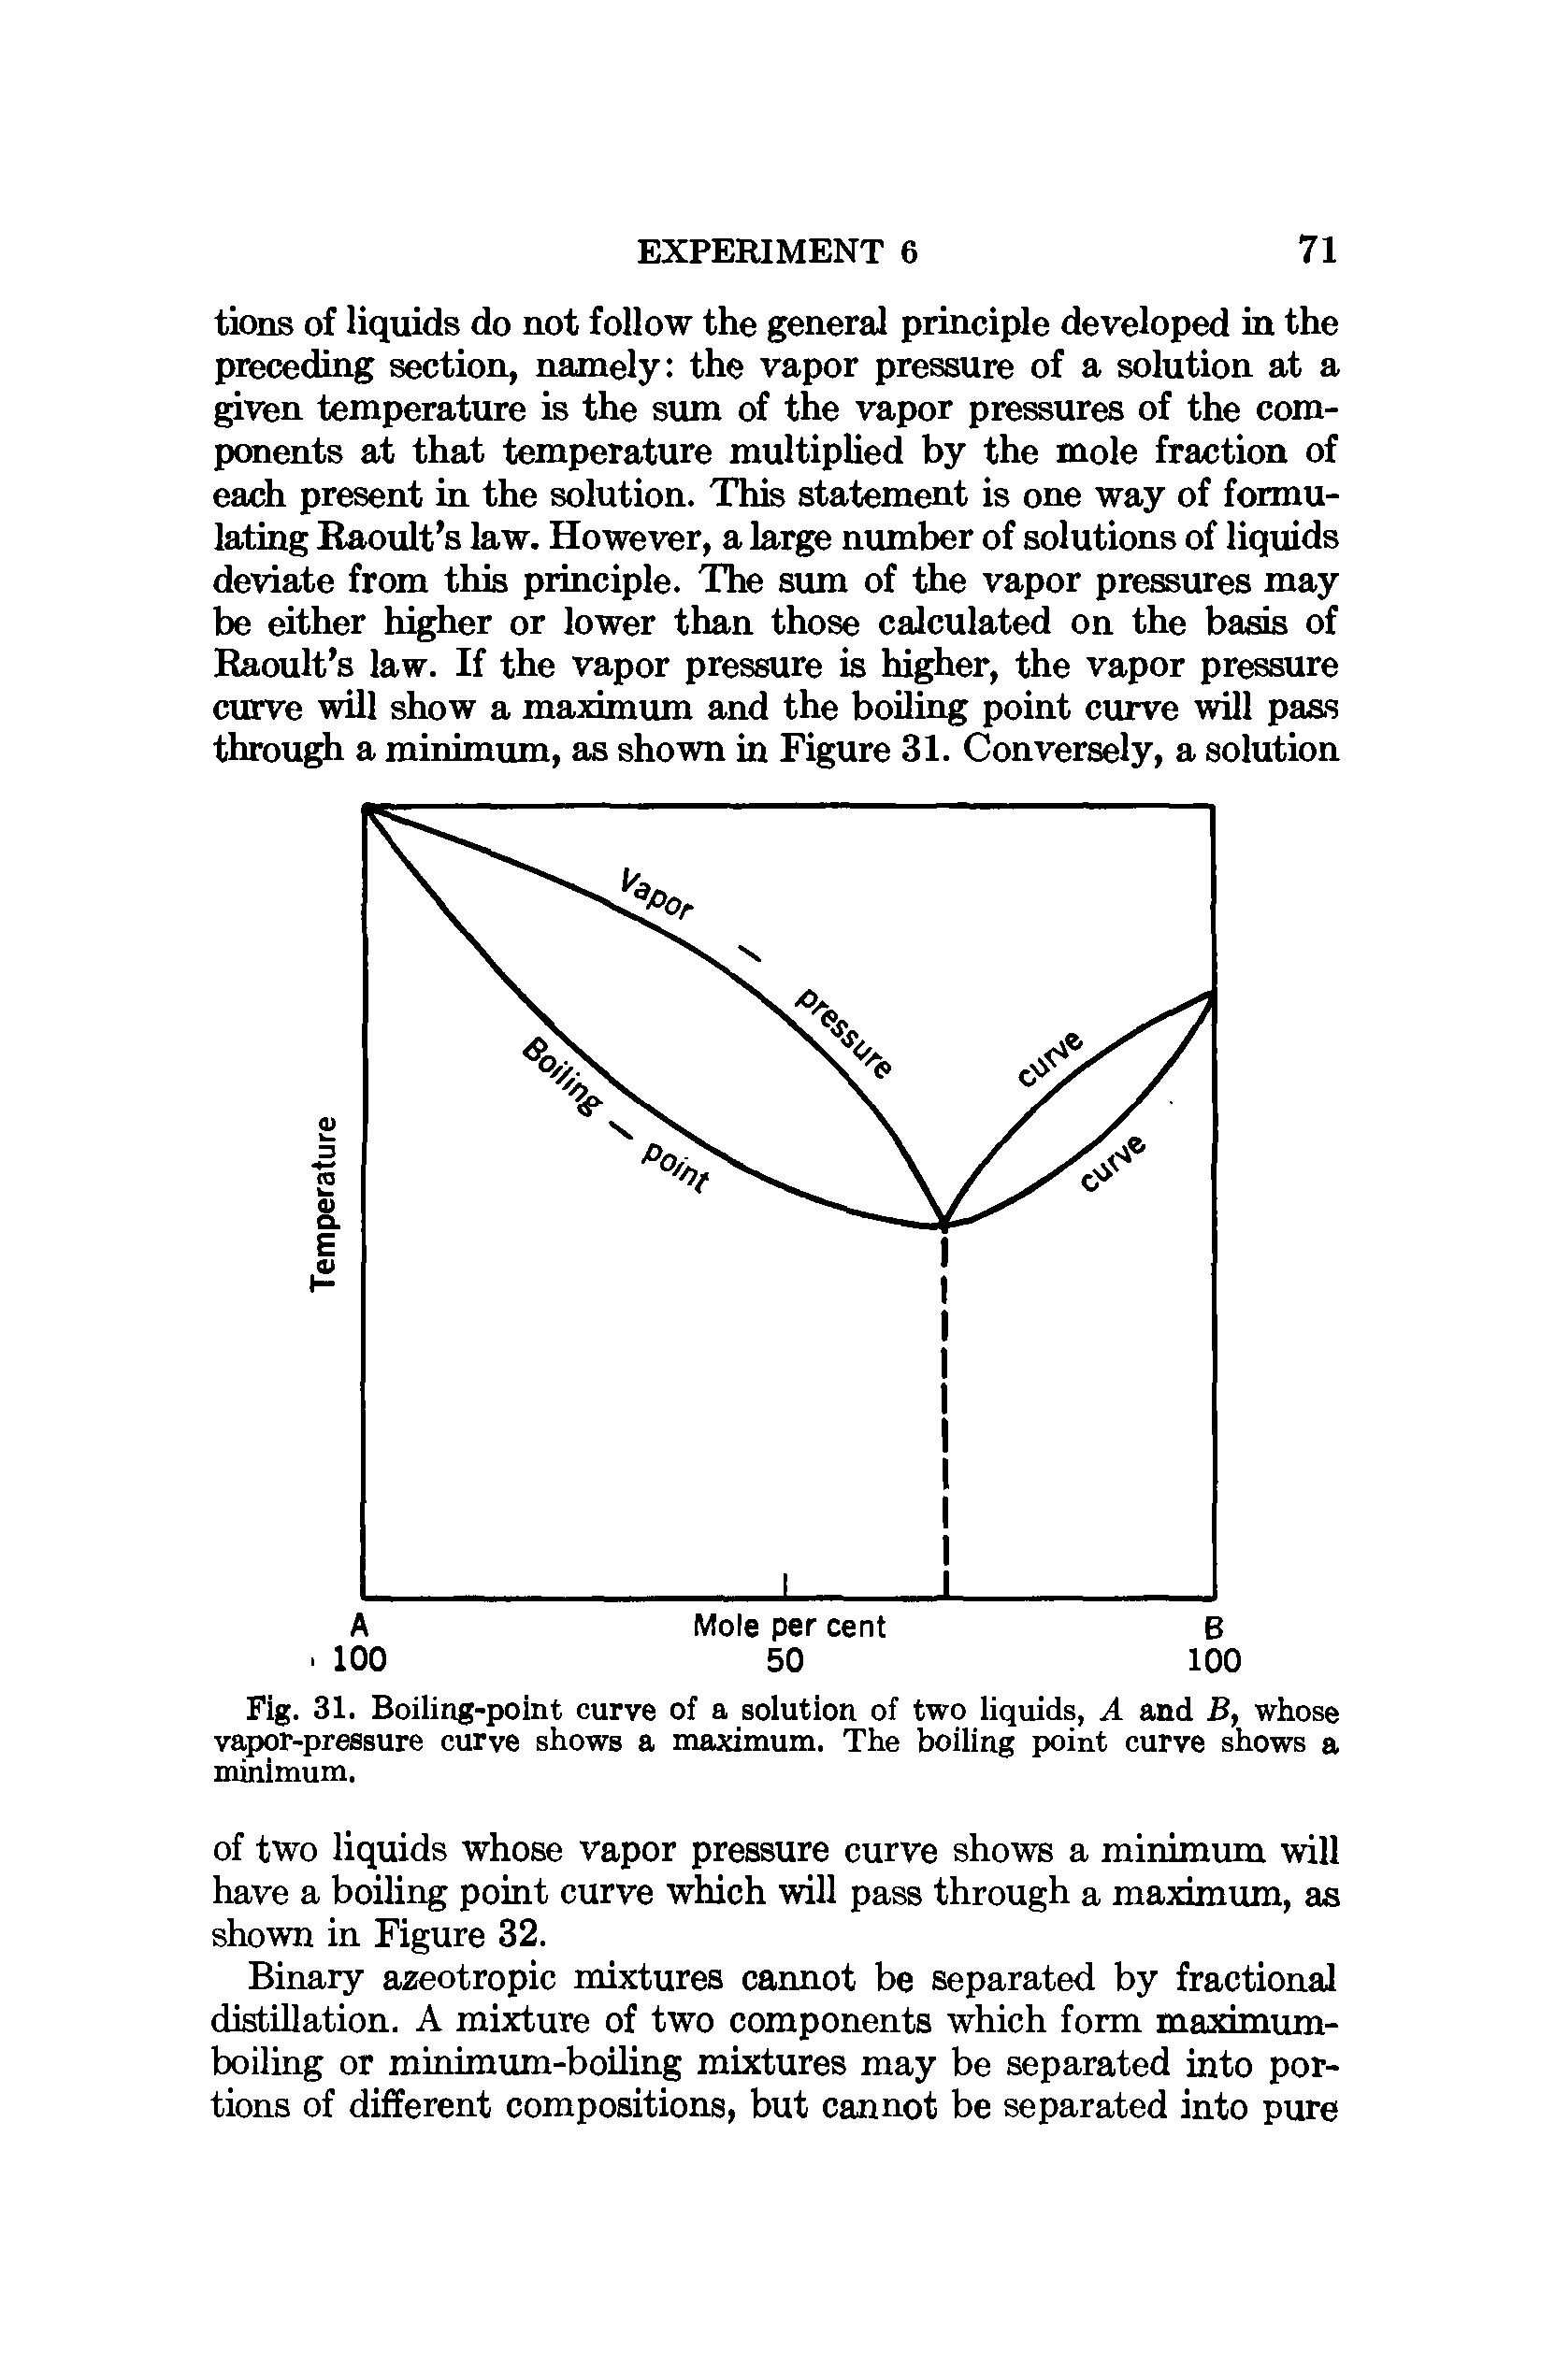 Fig. 31. Boiling-point curve of a solution of two liquids, A and B, whose vapor-pressure curve shows a maximum. The boiling point curve shows a minimum.